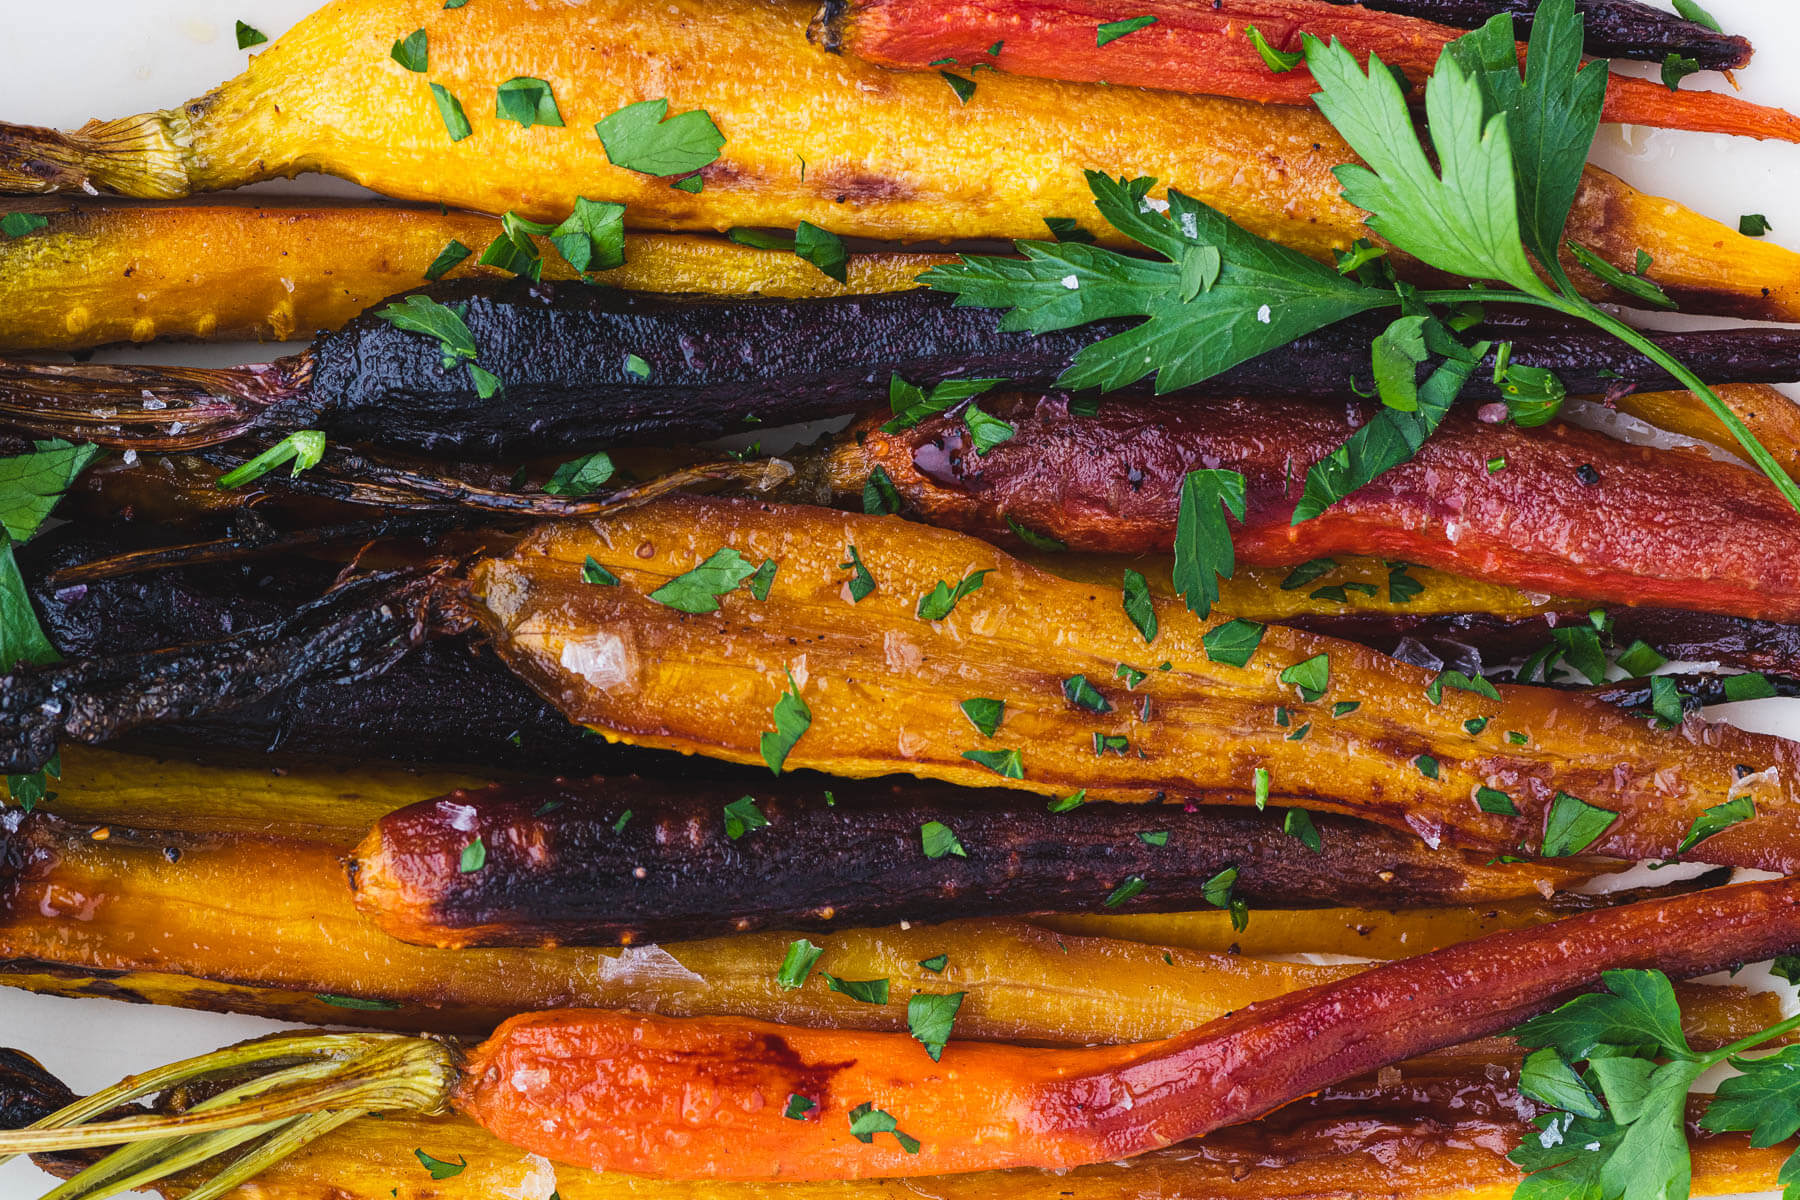 Colourful Maple Balsamic Roasted Carrots garnished with coarse salt and chopped parsley.